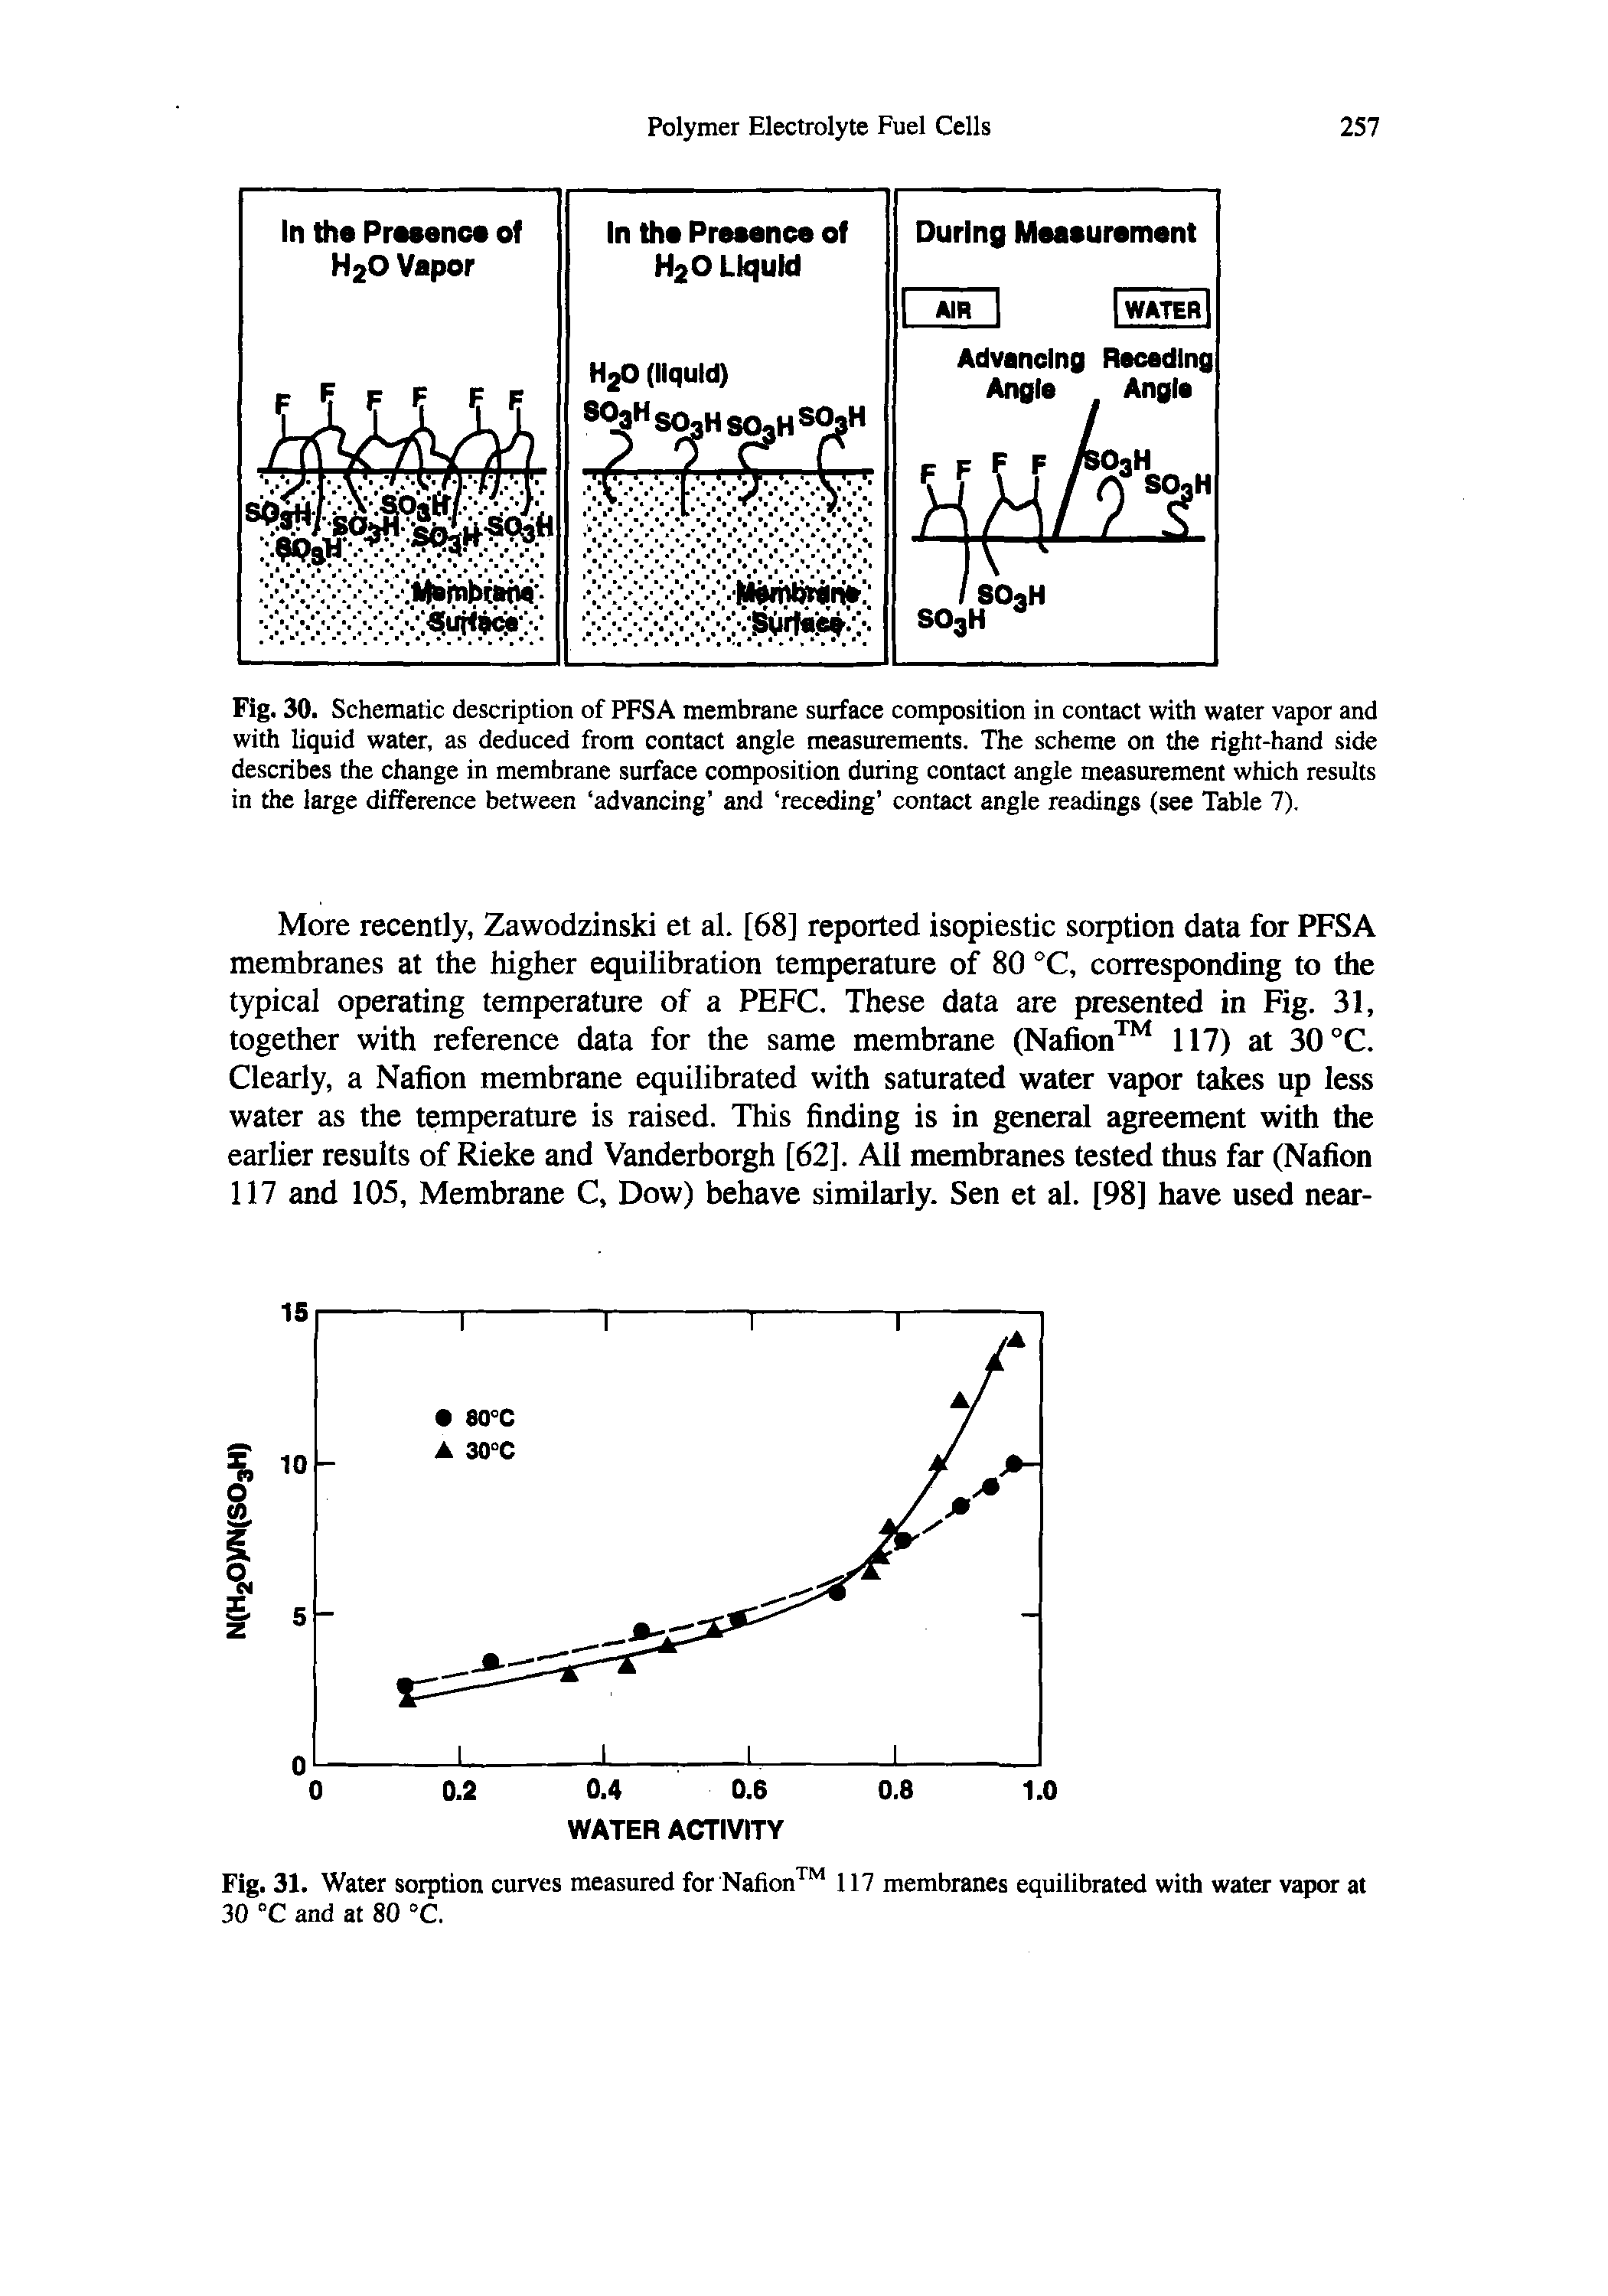 Fig. 30. Schematic description of PFSA membrane surface composition in contact with water vapor and with liquid water, as deduced from contact angle measurements. The scheme on the right-hand side describes the change in membrane surface composition during contact angle measurement which results in the large difference between advancing and receding contact angle readings (see Table 7),...